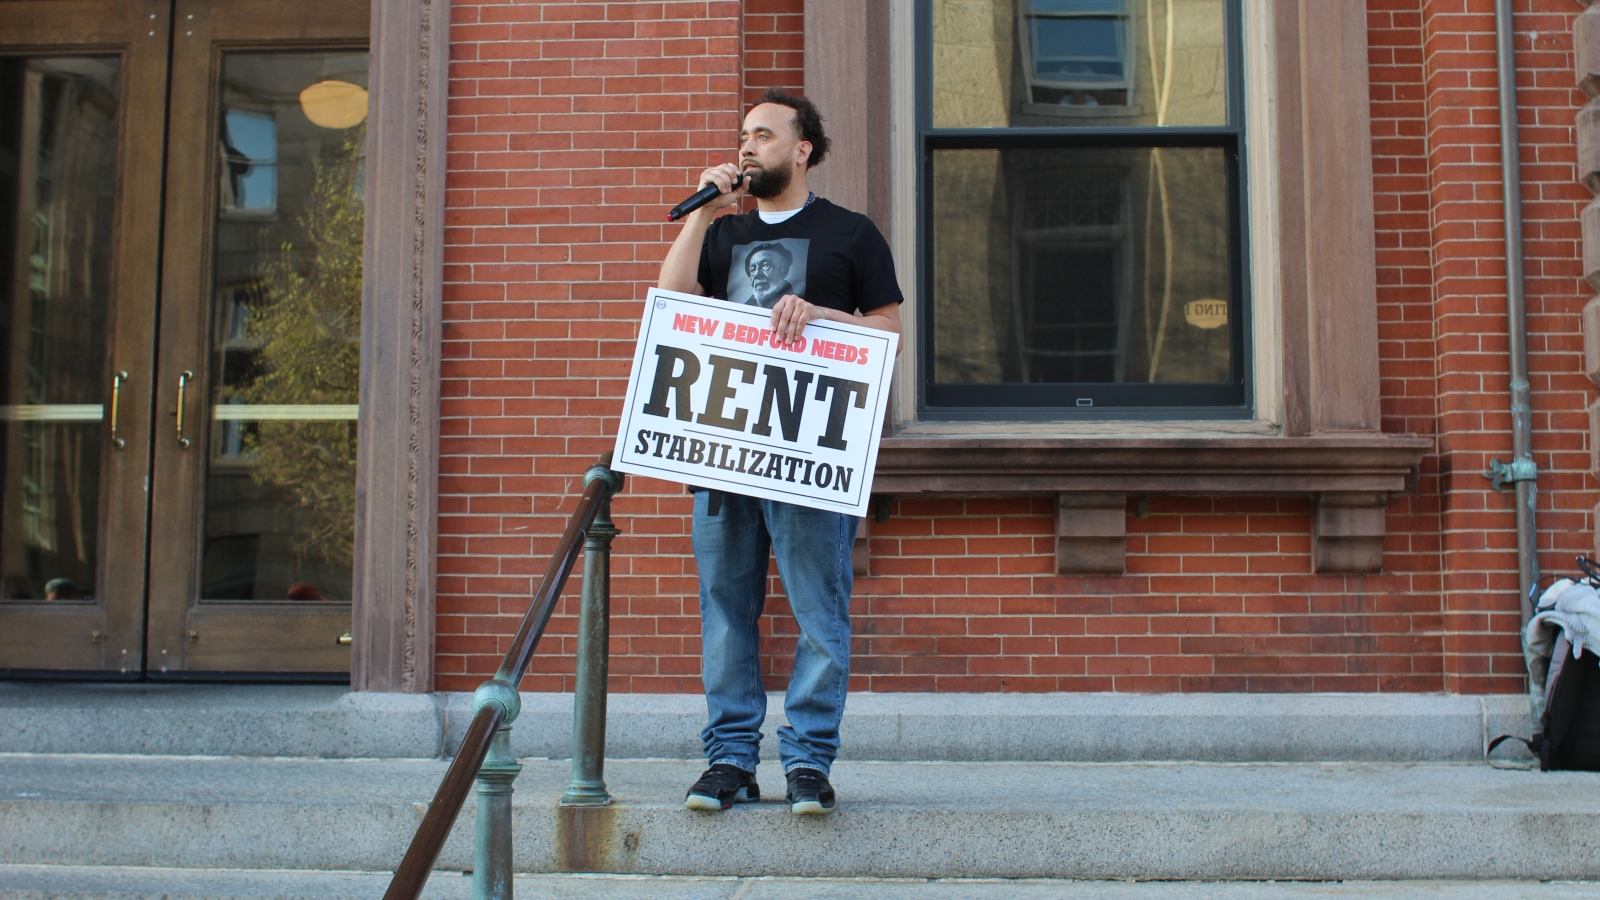 Activist Erik Andrade convened a rally before Thursday's vote on rent stabilization.